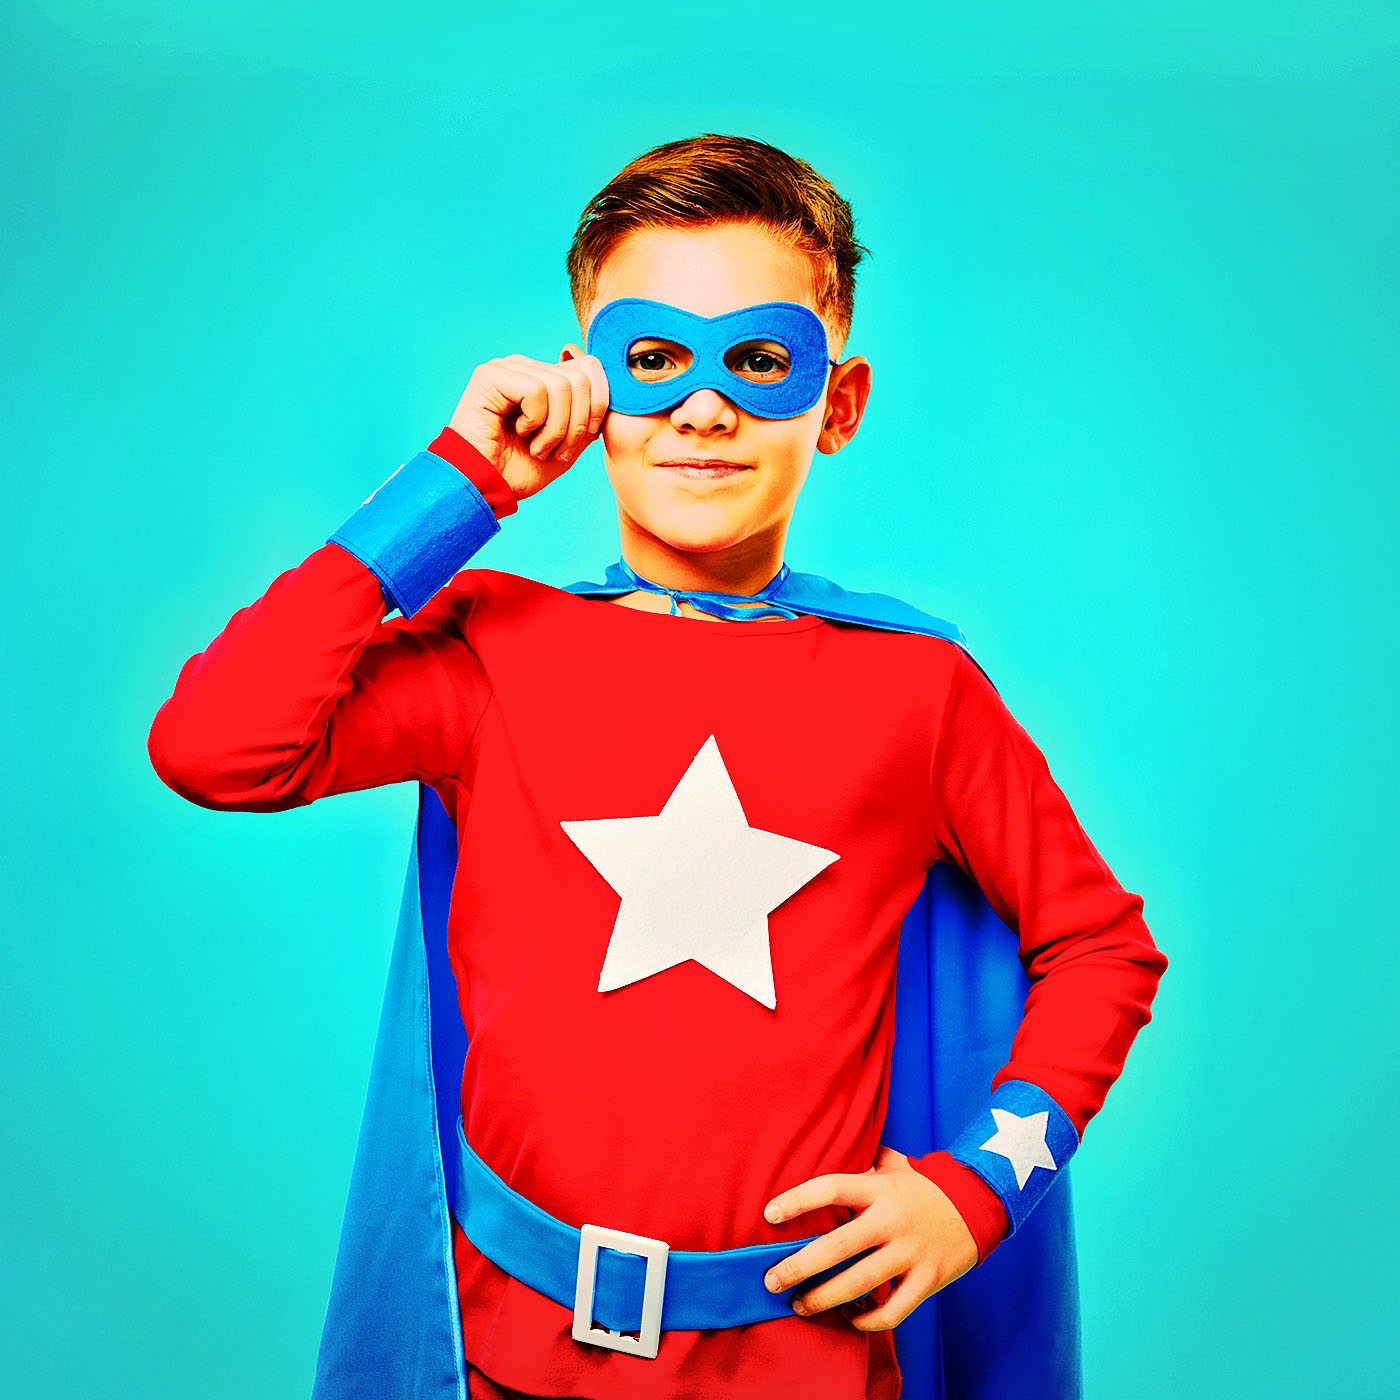 Smiling child wearing bright superhero cape and mask standing with hand on waist and looking at camera on blue background